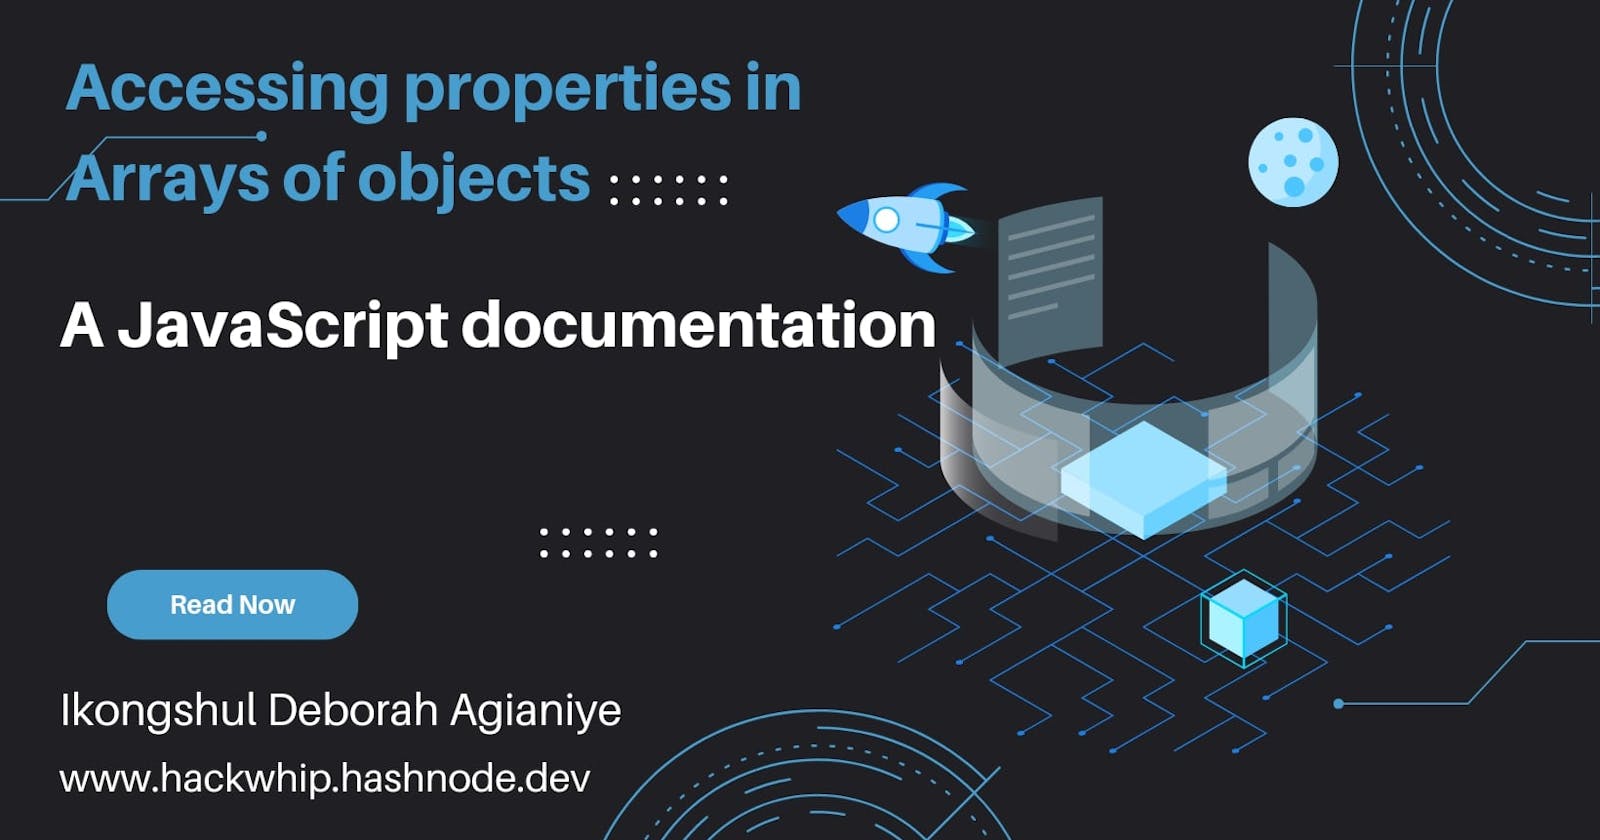 Accessing Properties in Arrays of Objects in JavaScript